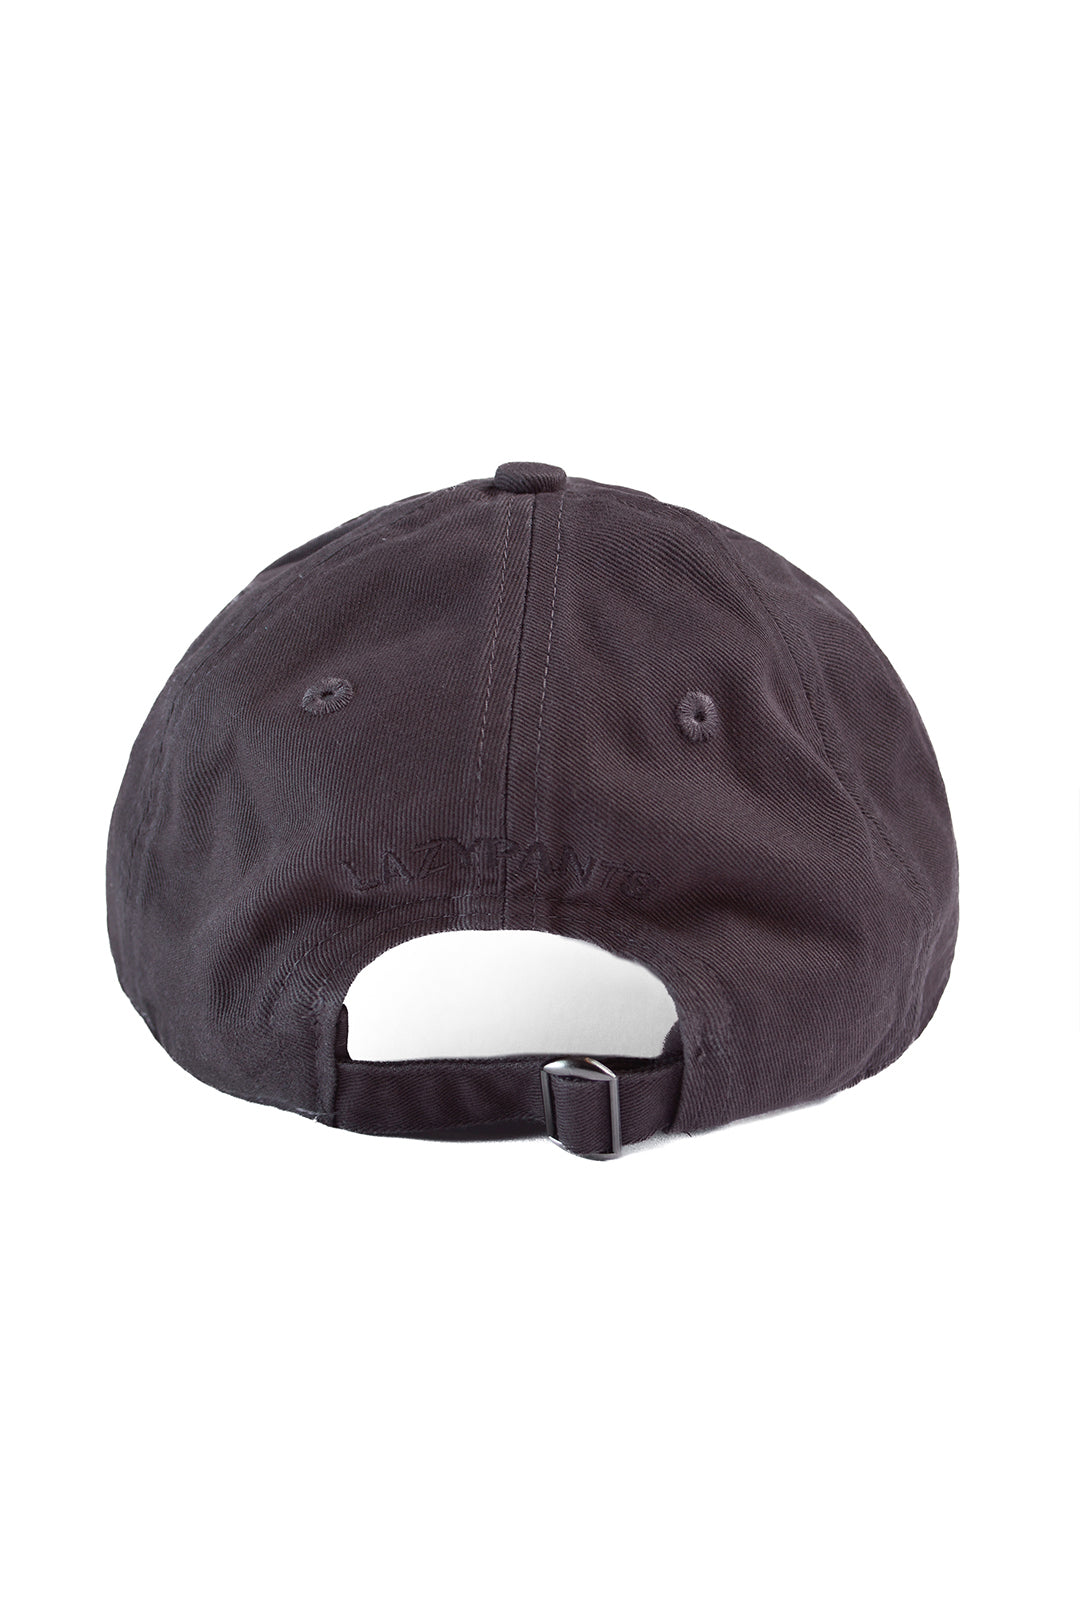 Washed cotton twill dad’s baseball cap in charcoal